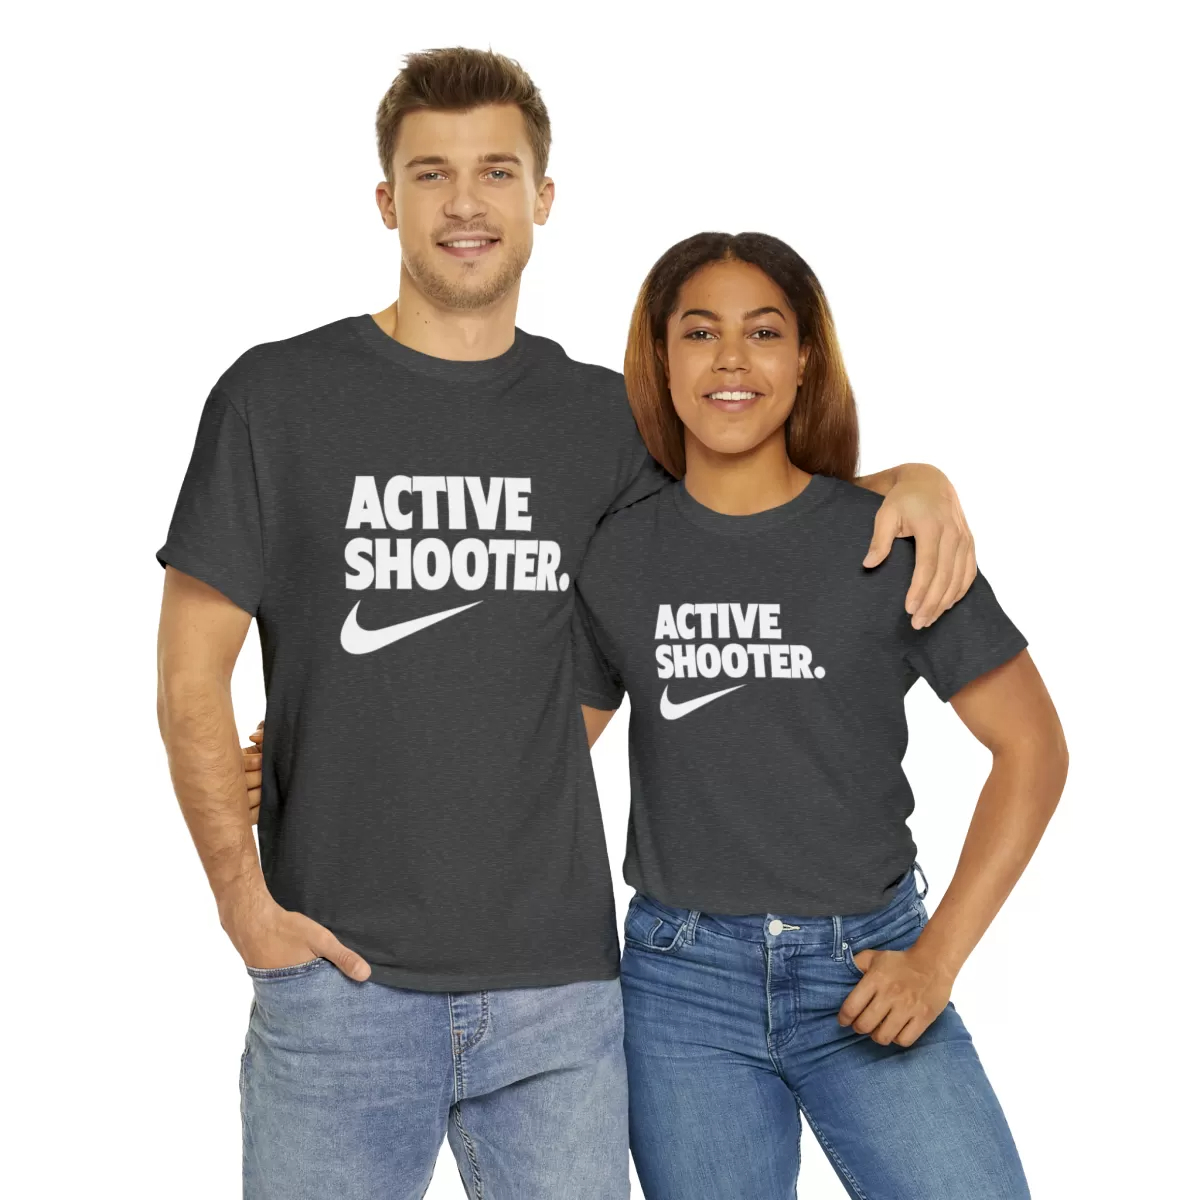 Active shooter t shirt – comfortable to wear during sports插图